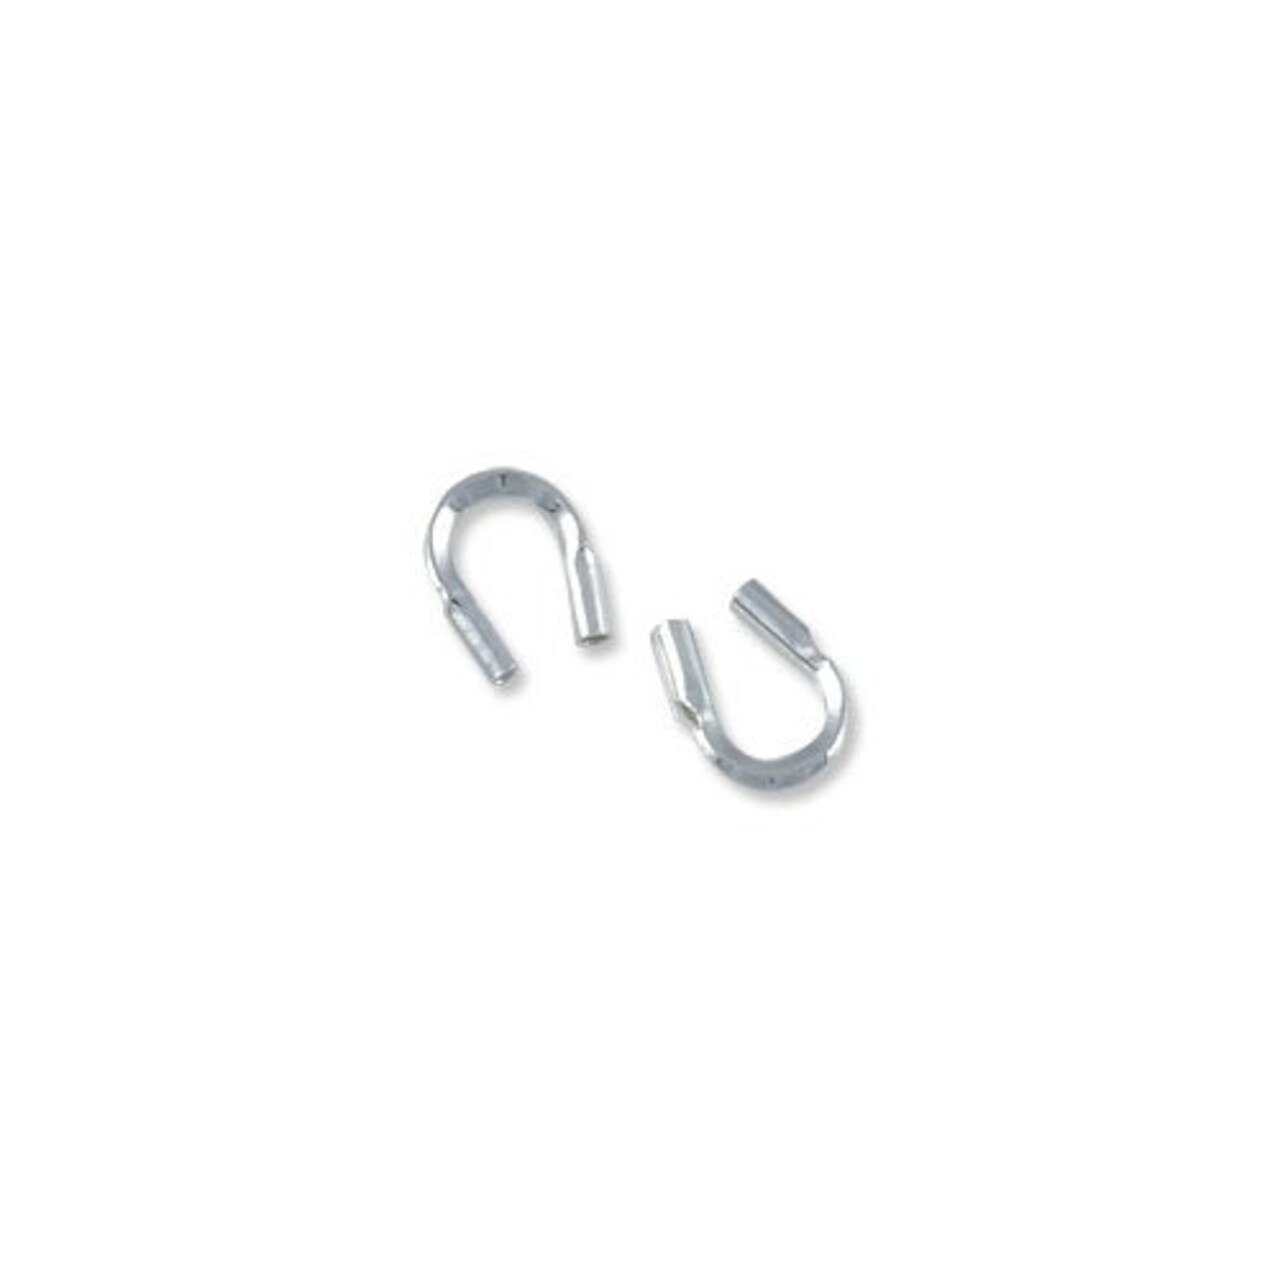 Wire Protector Guard .50mm Hole Sterling Silver (1-Pc)